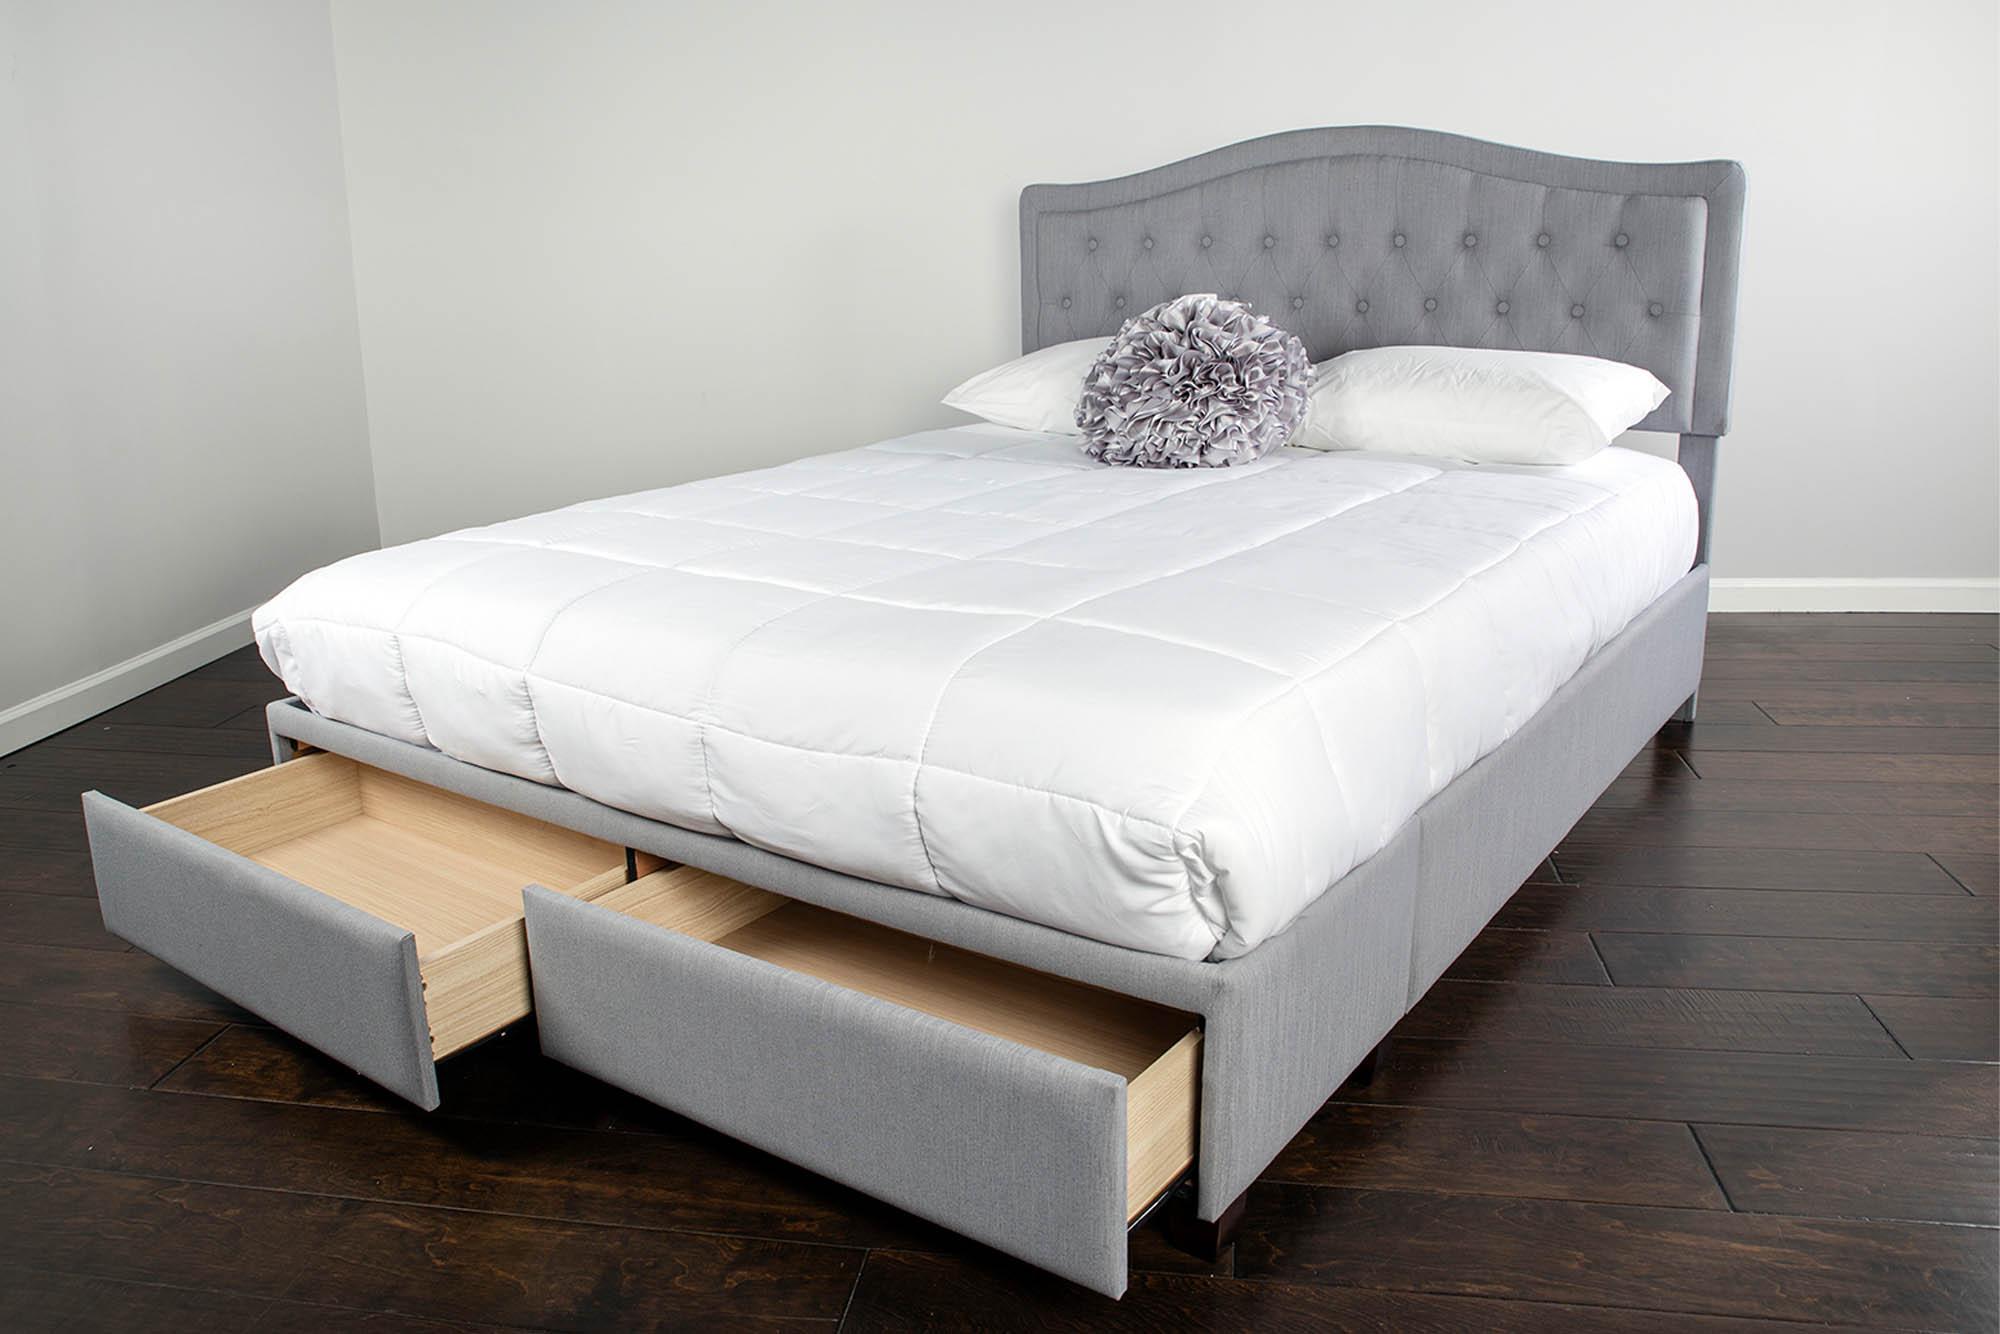 Modern, Transitional Storage Bed SKYLA 1190DS-110 1190DS-110 in Gray Fabric